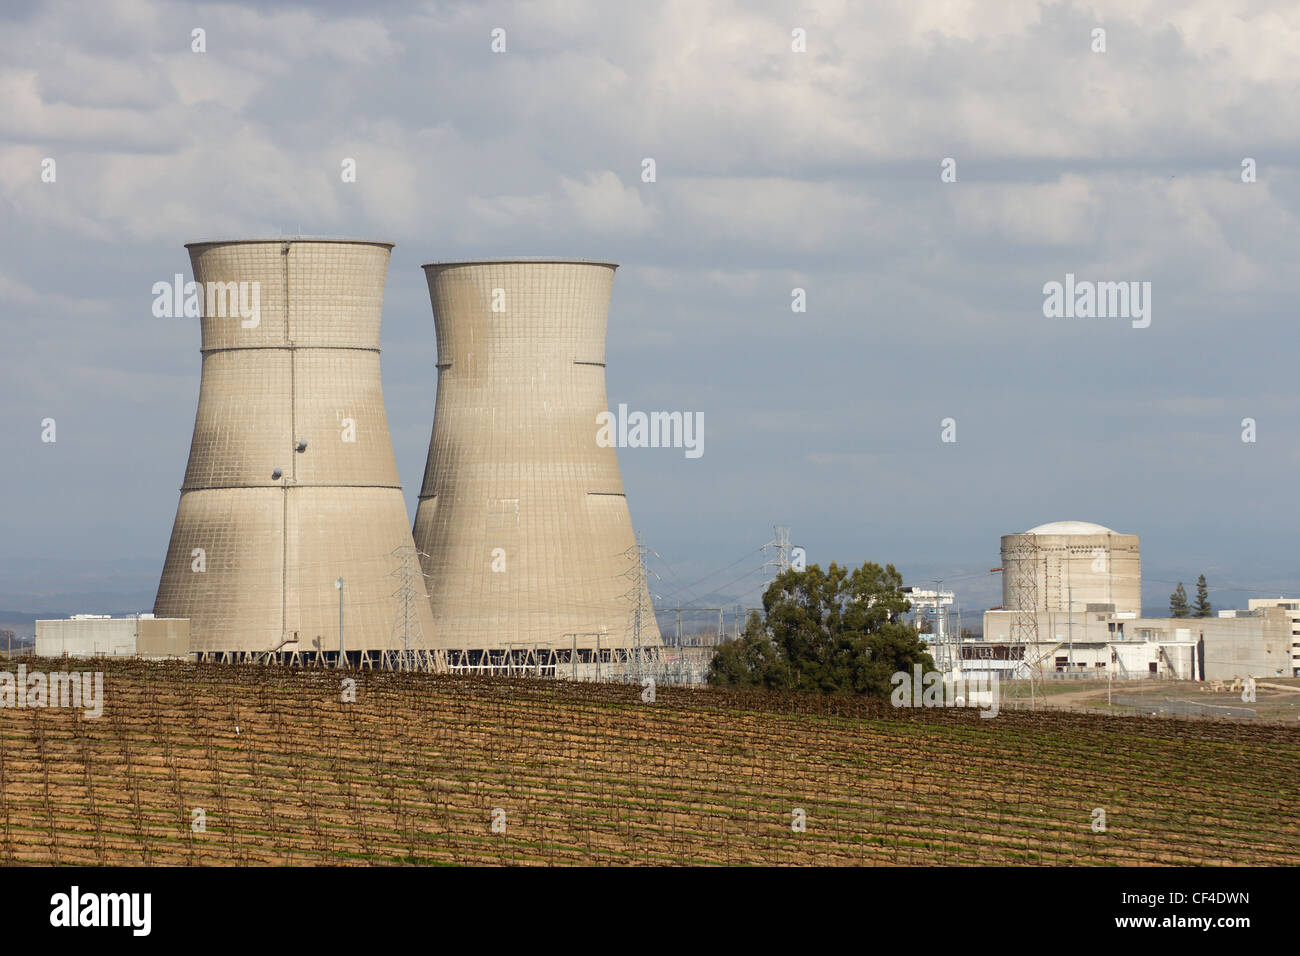 Decommissioned Nuclear power plant in Sacramento, California showing grape vines in the fields surrounding the cooling towers. Stock Photo